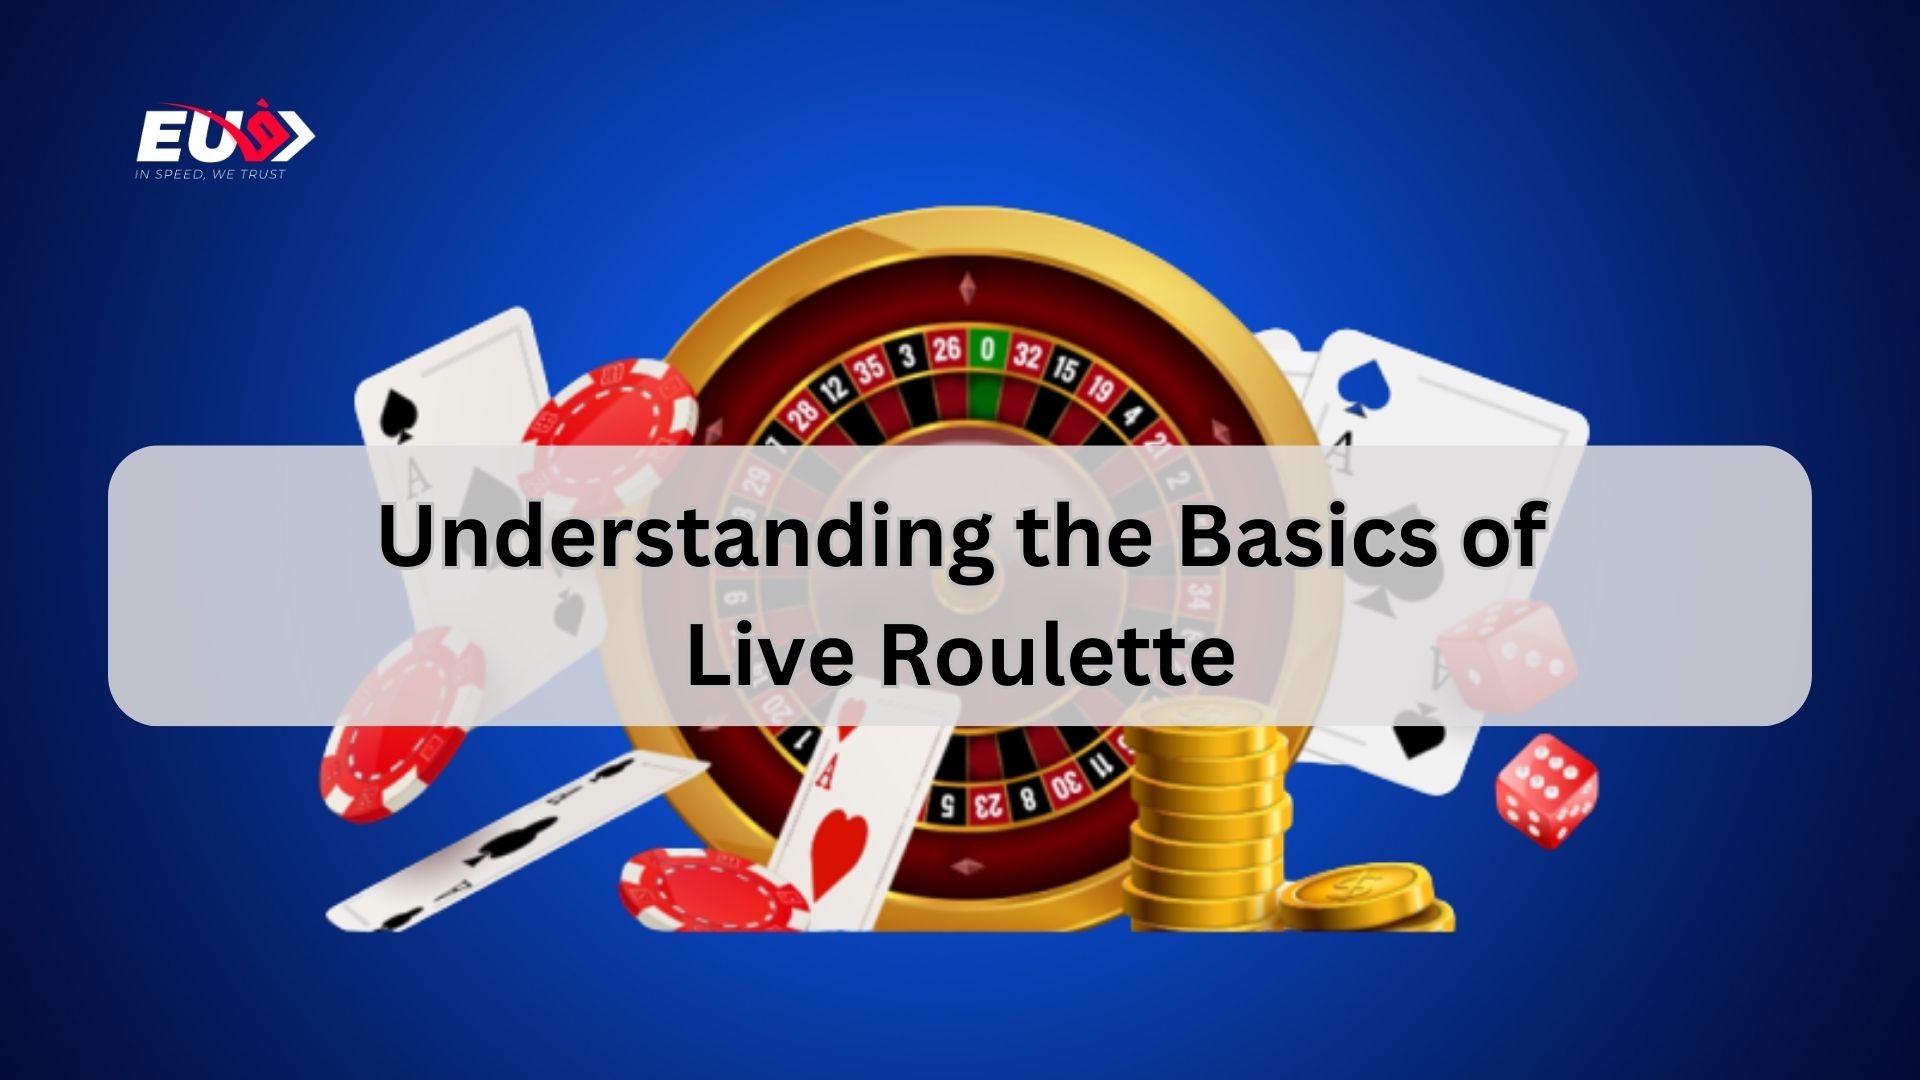 Understanding the Basics of Live Roulette